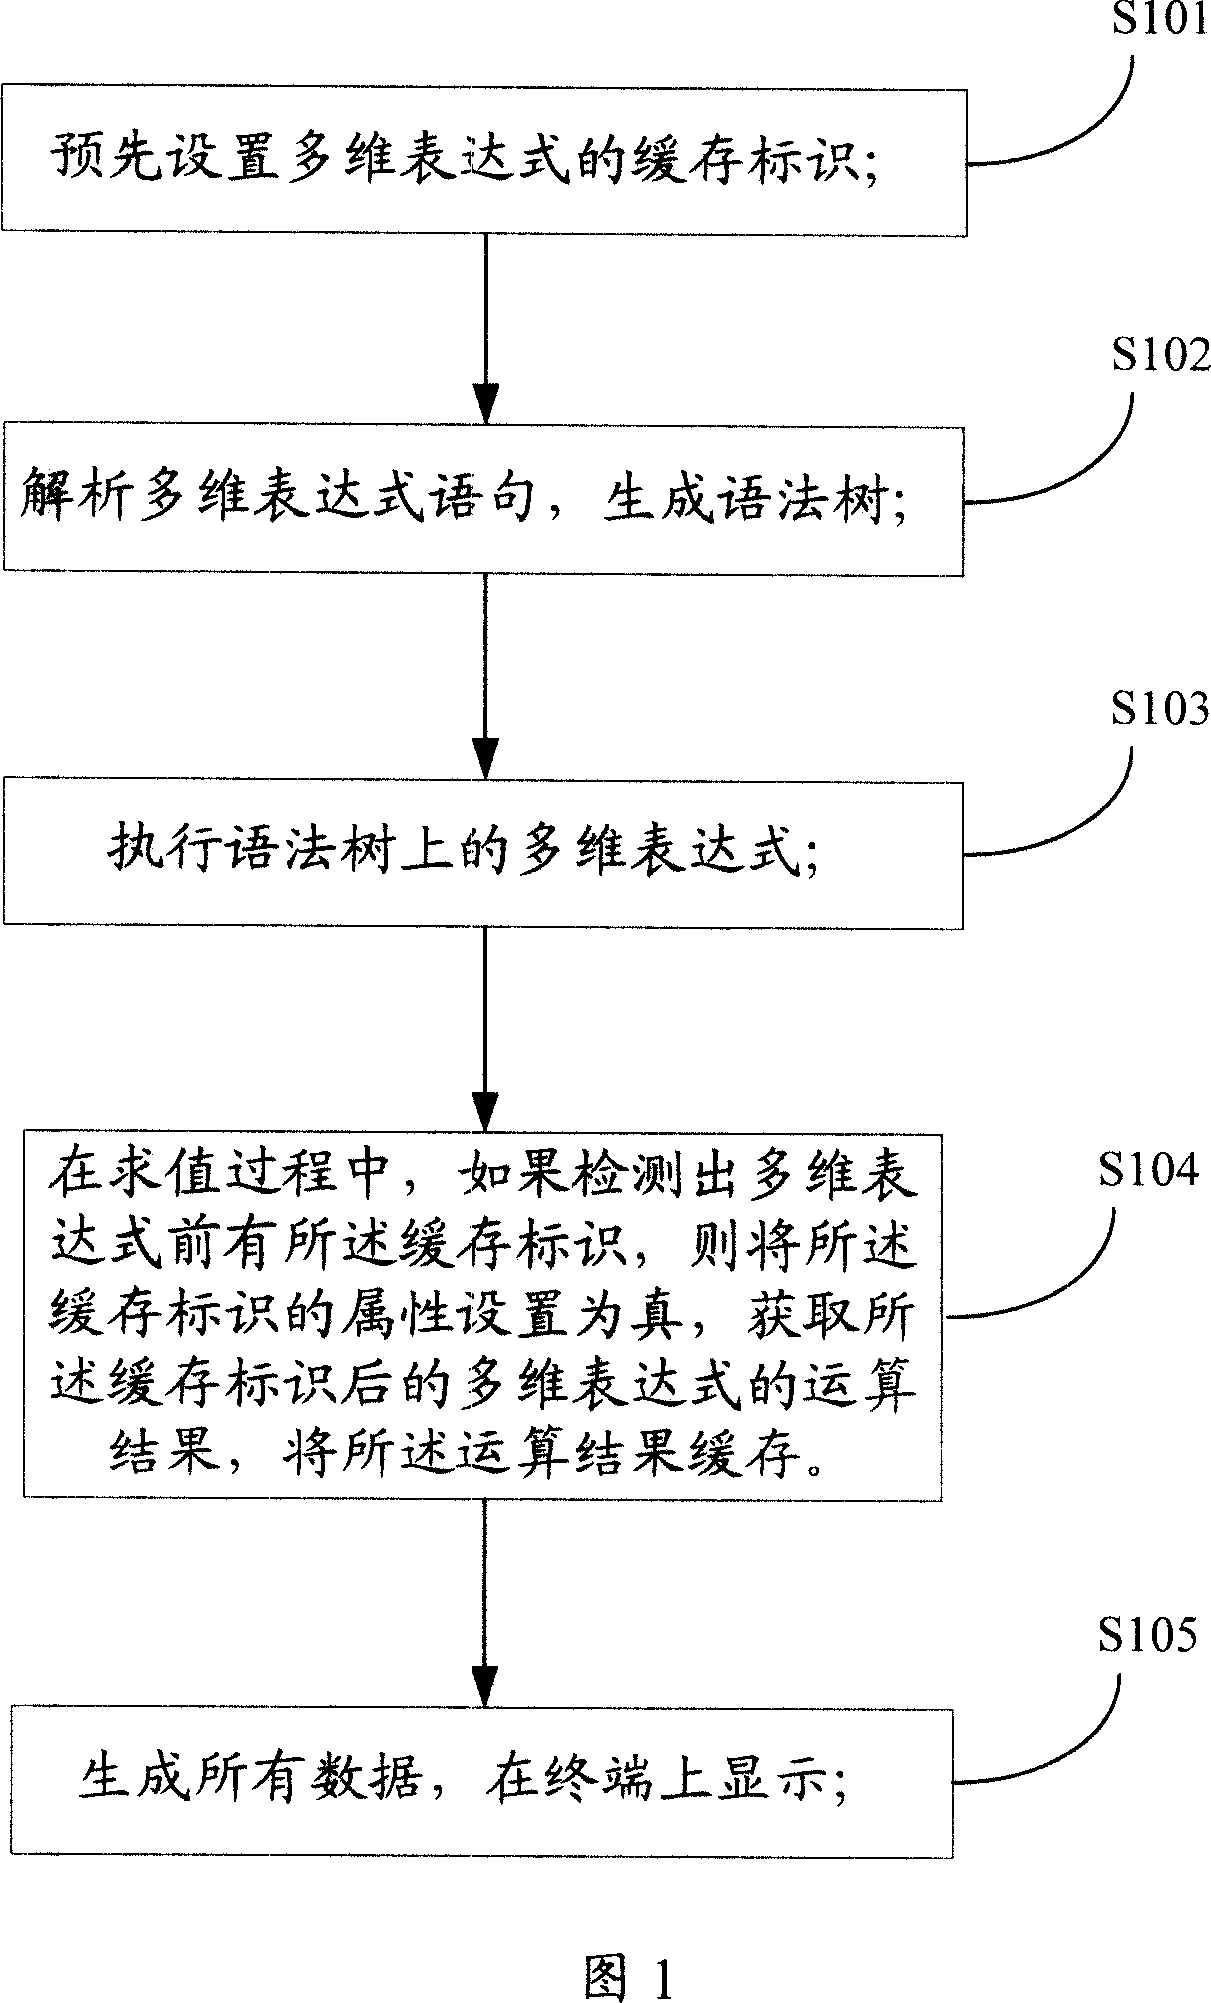 Multidimensional expression data caching method and device in online analytical processing system